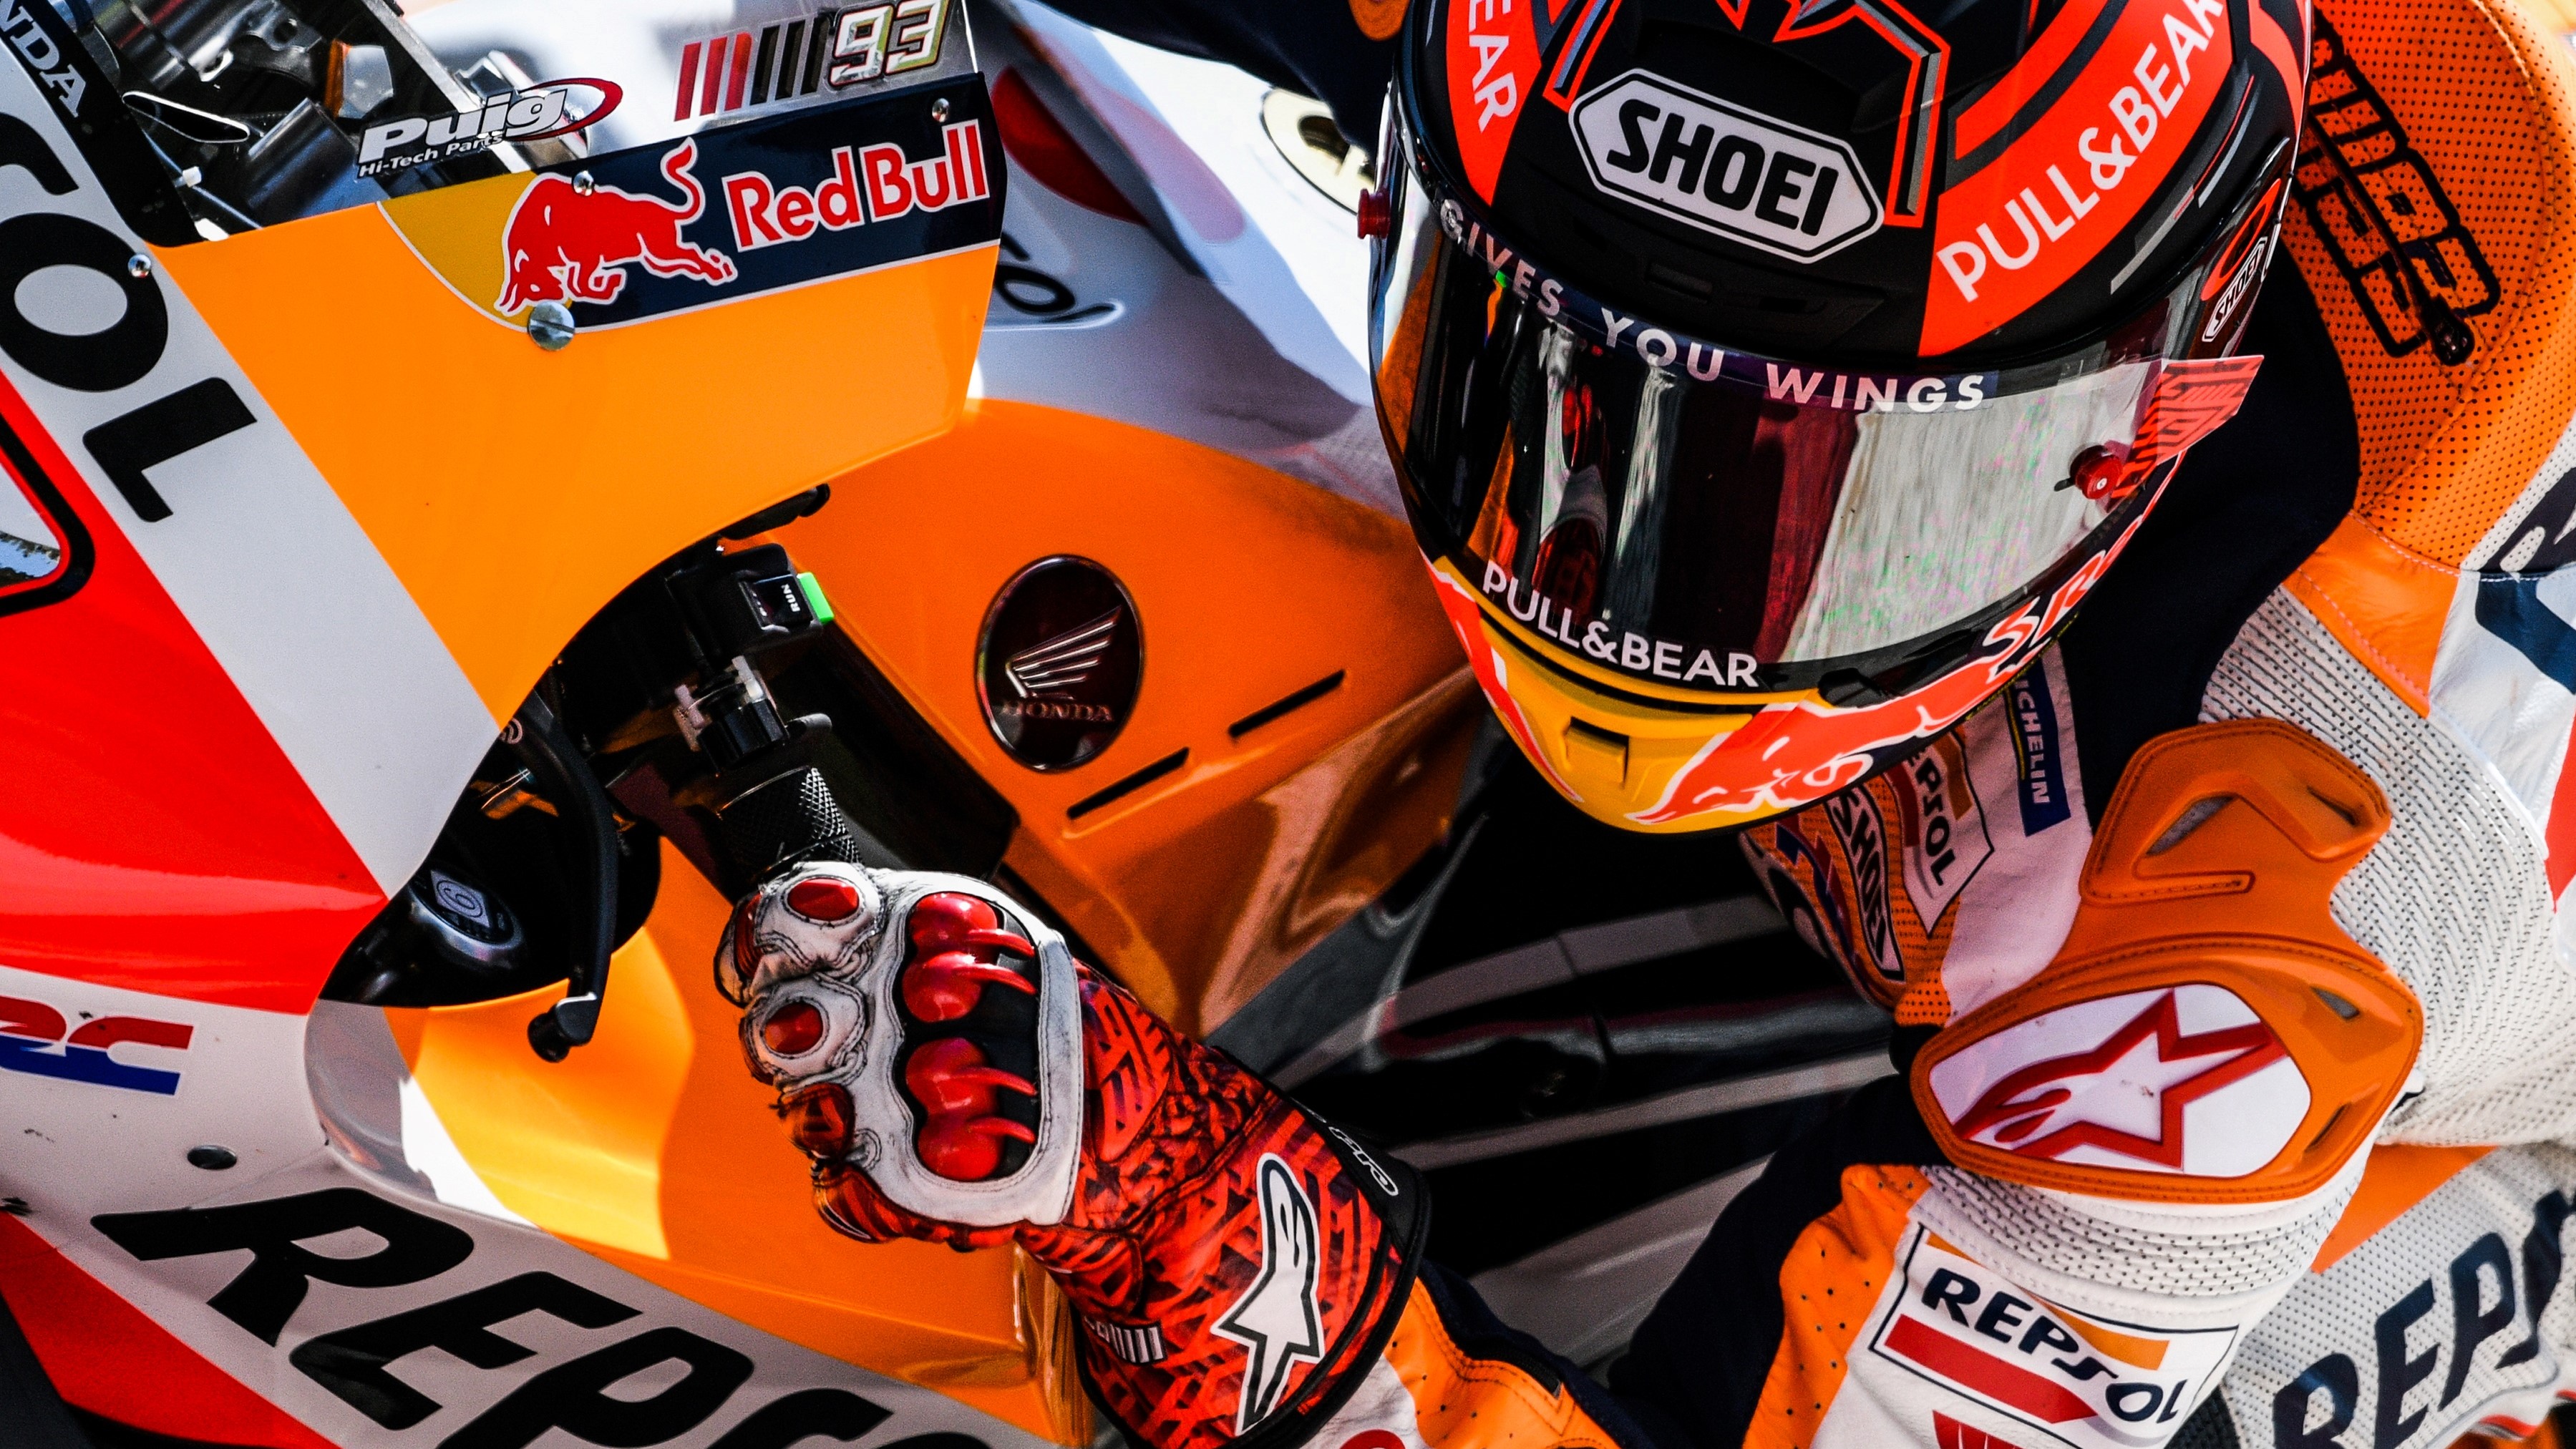 How to watch MotoGP live stream every 2021 Grand Prix online from